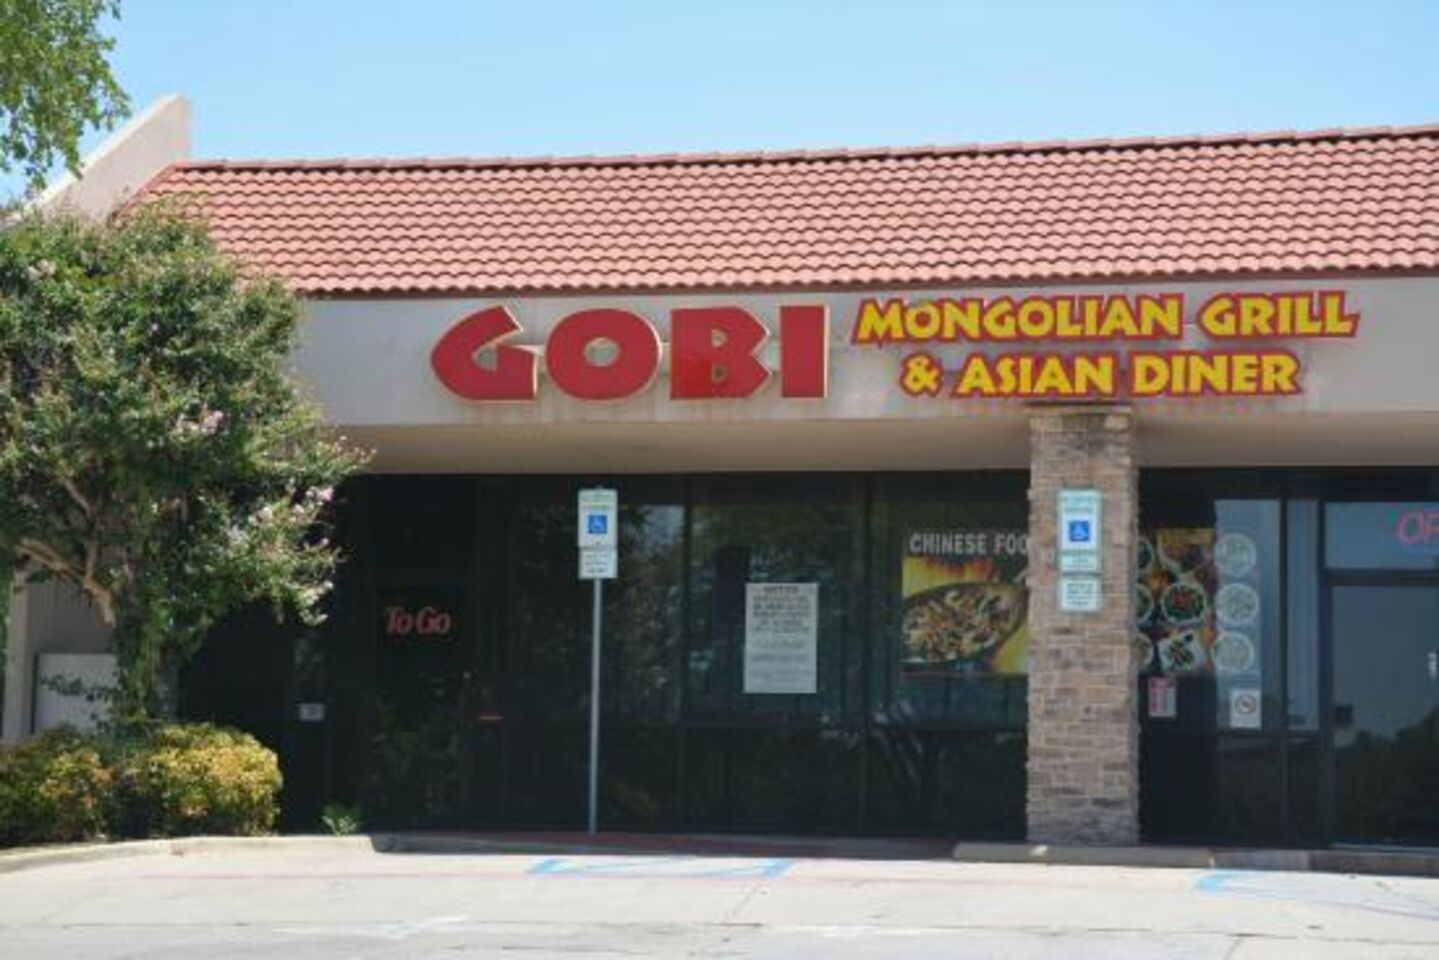 A photo of Gobi Mongolian Grill & Asian Diner